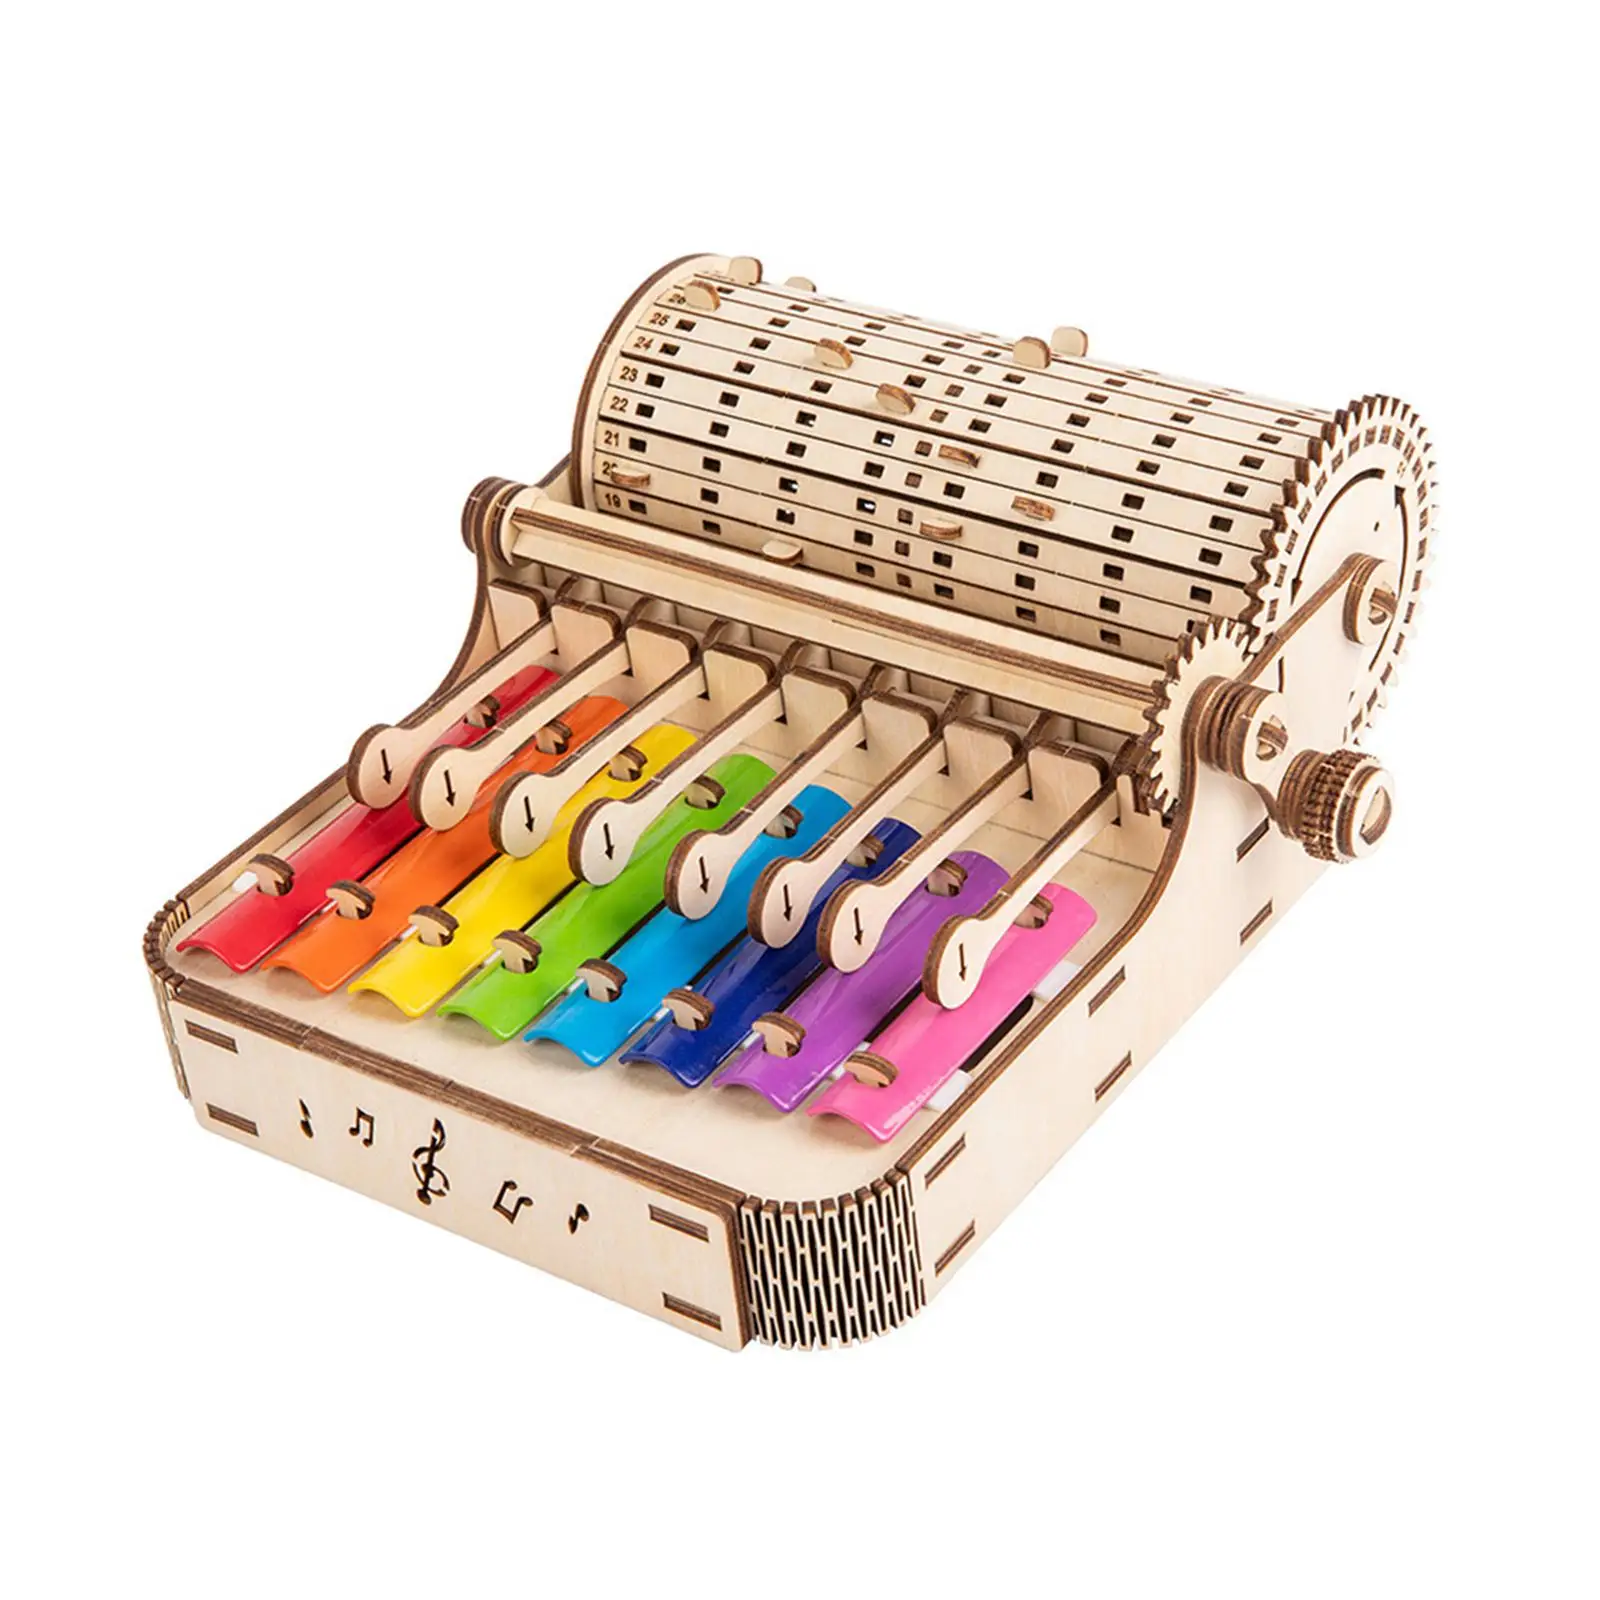 DIY Toy Piano Music Box Brain Teaser Instrument Toy Wooden Puzzle Building Hand Crank Engraved Musical Box for Kids Adults